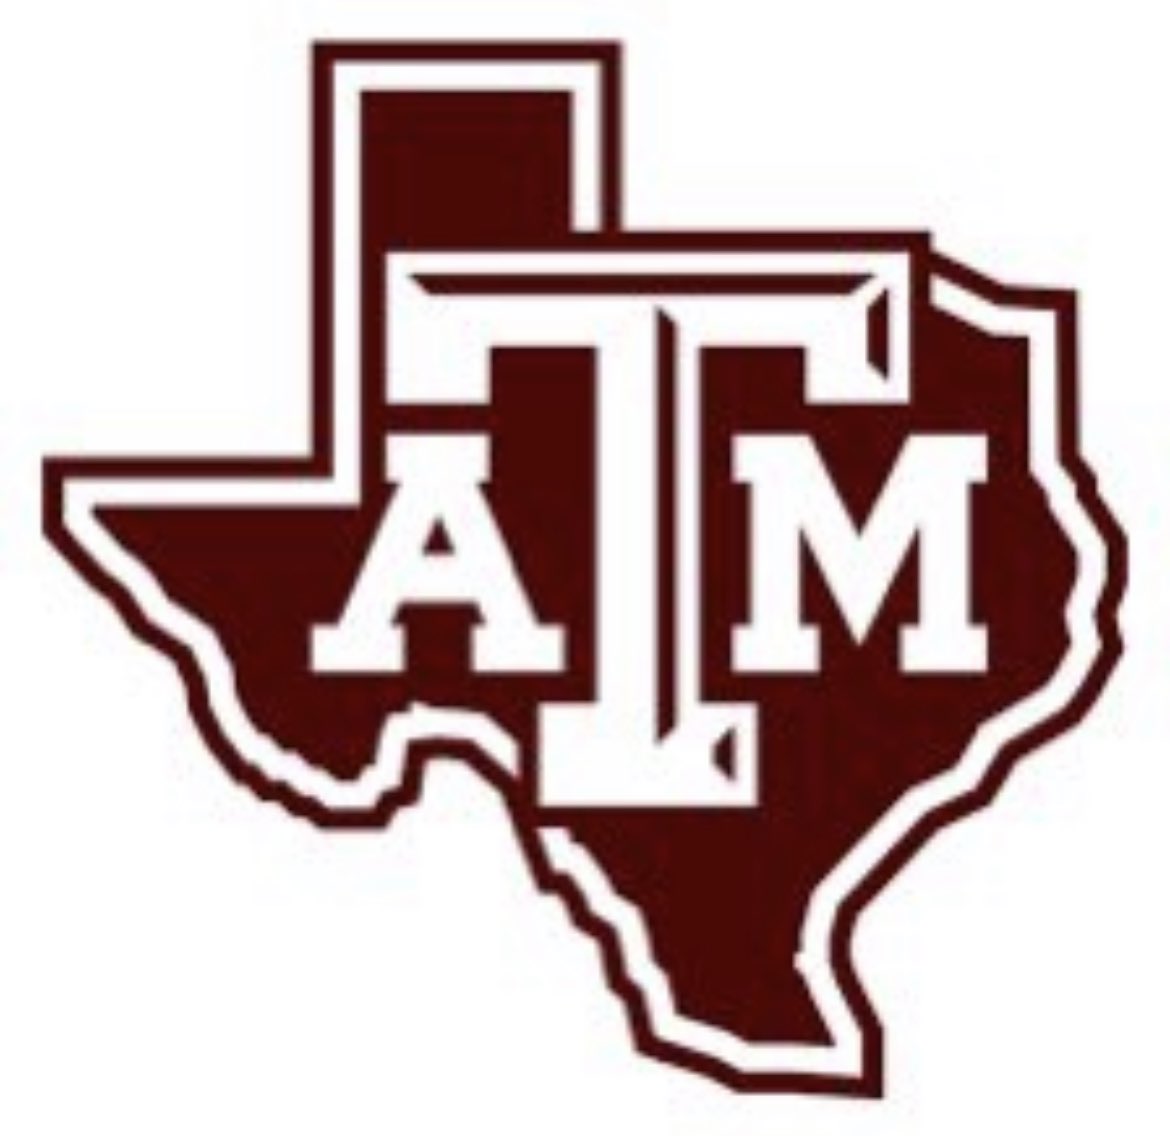 I am blessed to receive my First SEC offer from Texas A&M University. @ReggieBrown59 @7MichaelBishop @coachfreddiej @R_Brauninger @billyliucci @mbpRivals @Jason_Howell @AggieFootball @Perroni247 @LegacyTitanFB @LSSSTitans @LegacyTheBrand1 @Champ7460